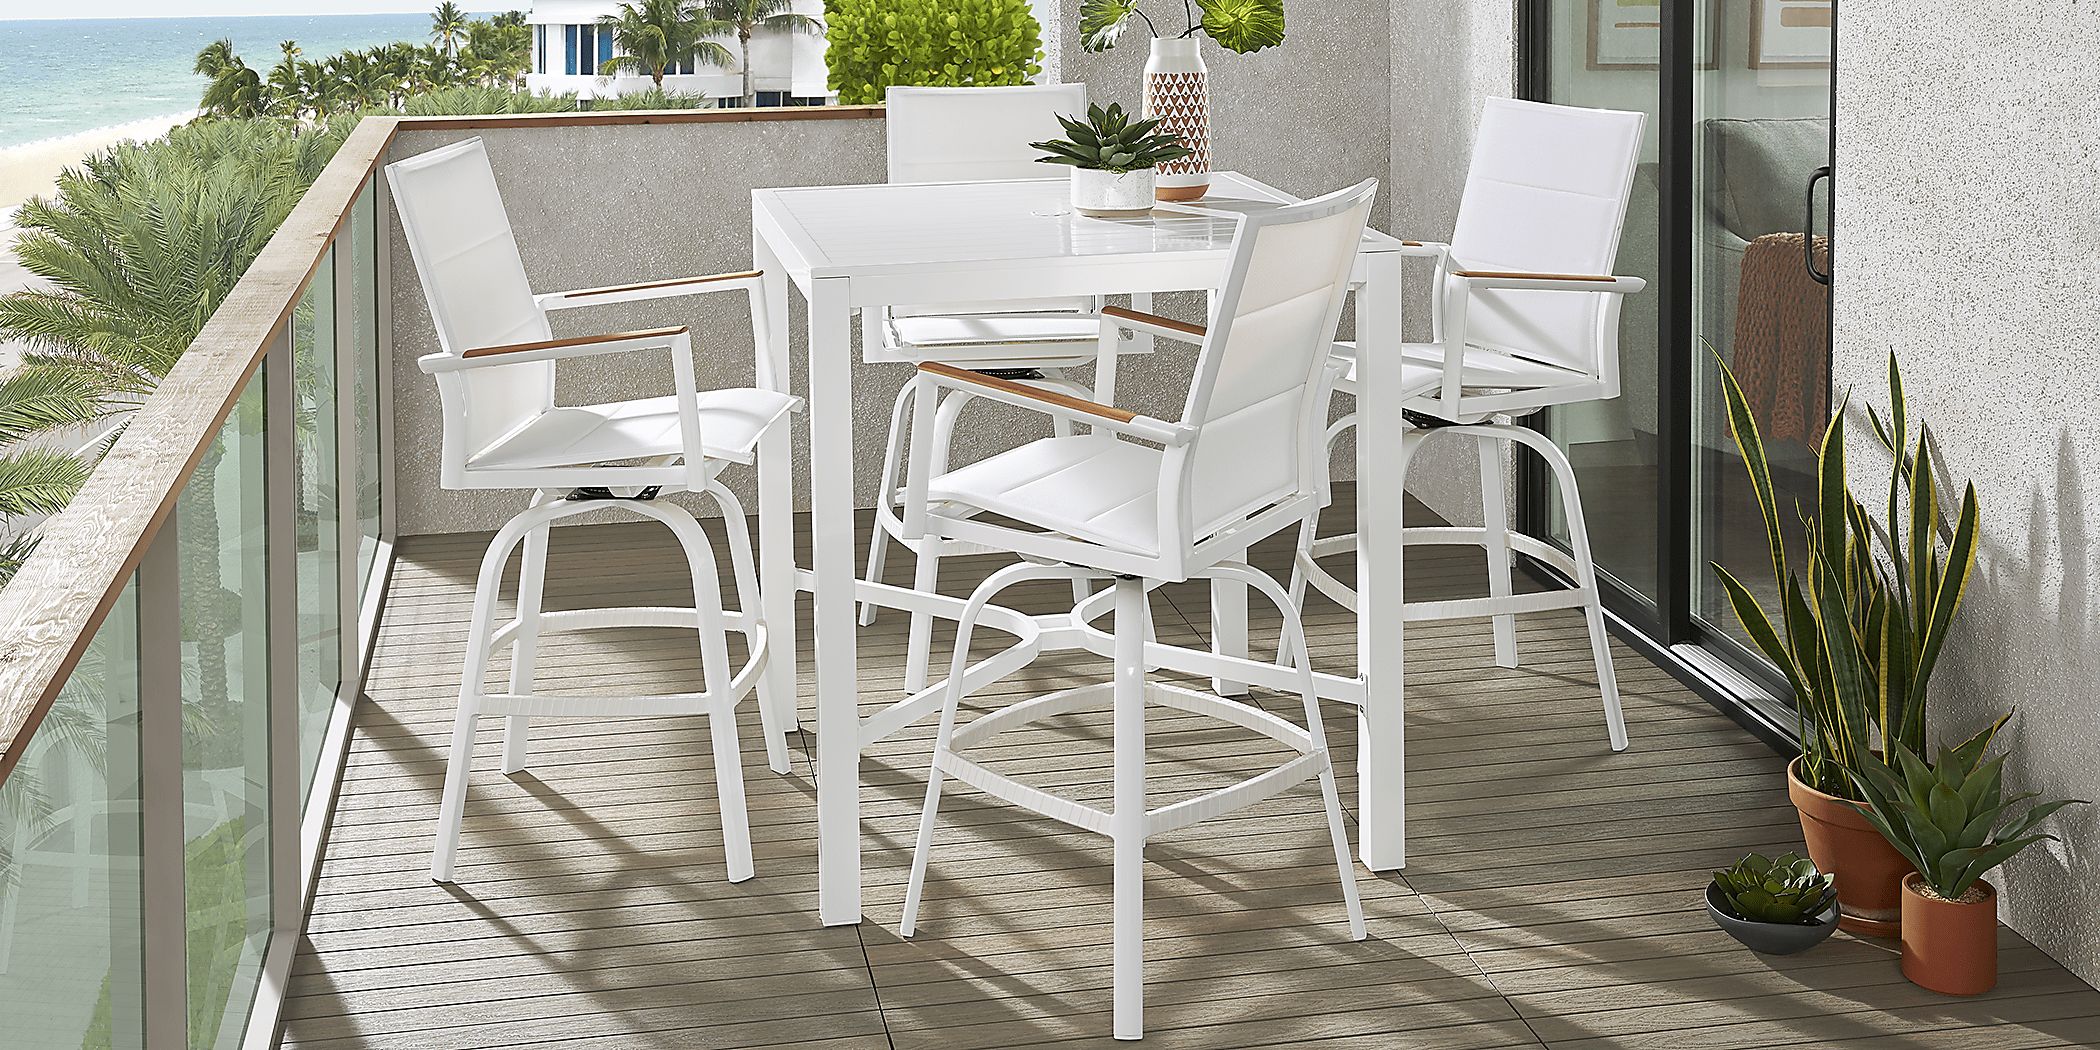 Solana White 5 Pc Outdoor Bar Height Dining Set with Swivel Barstools